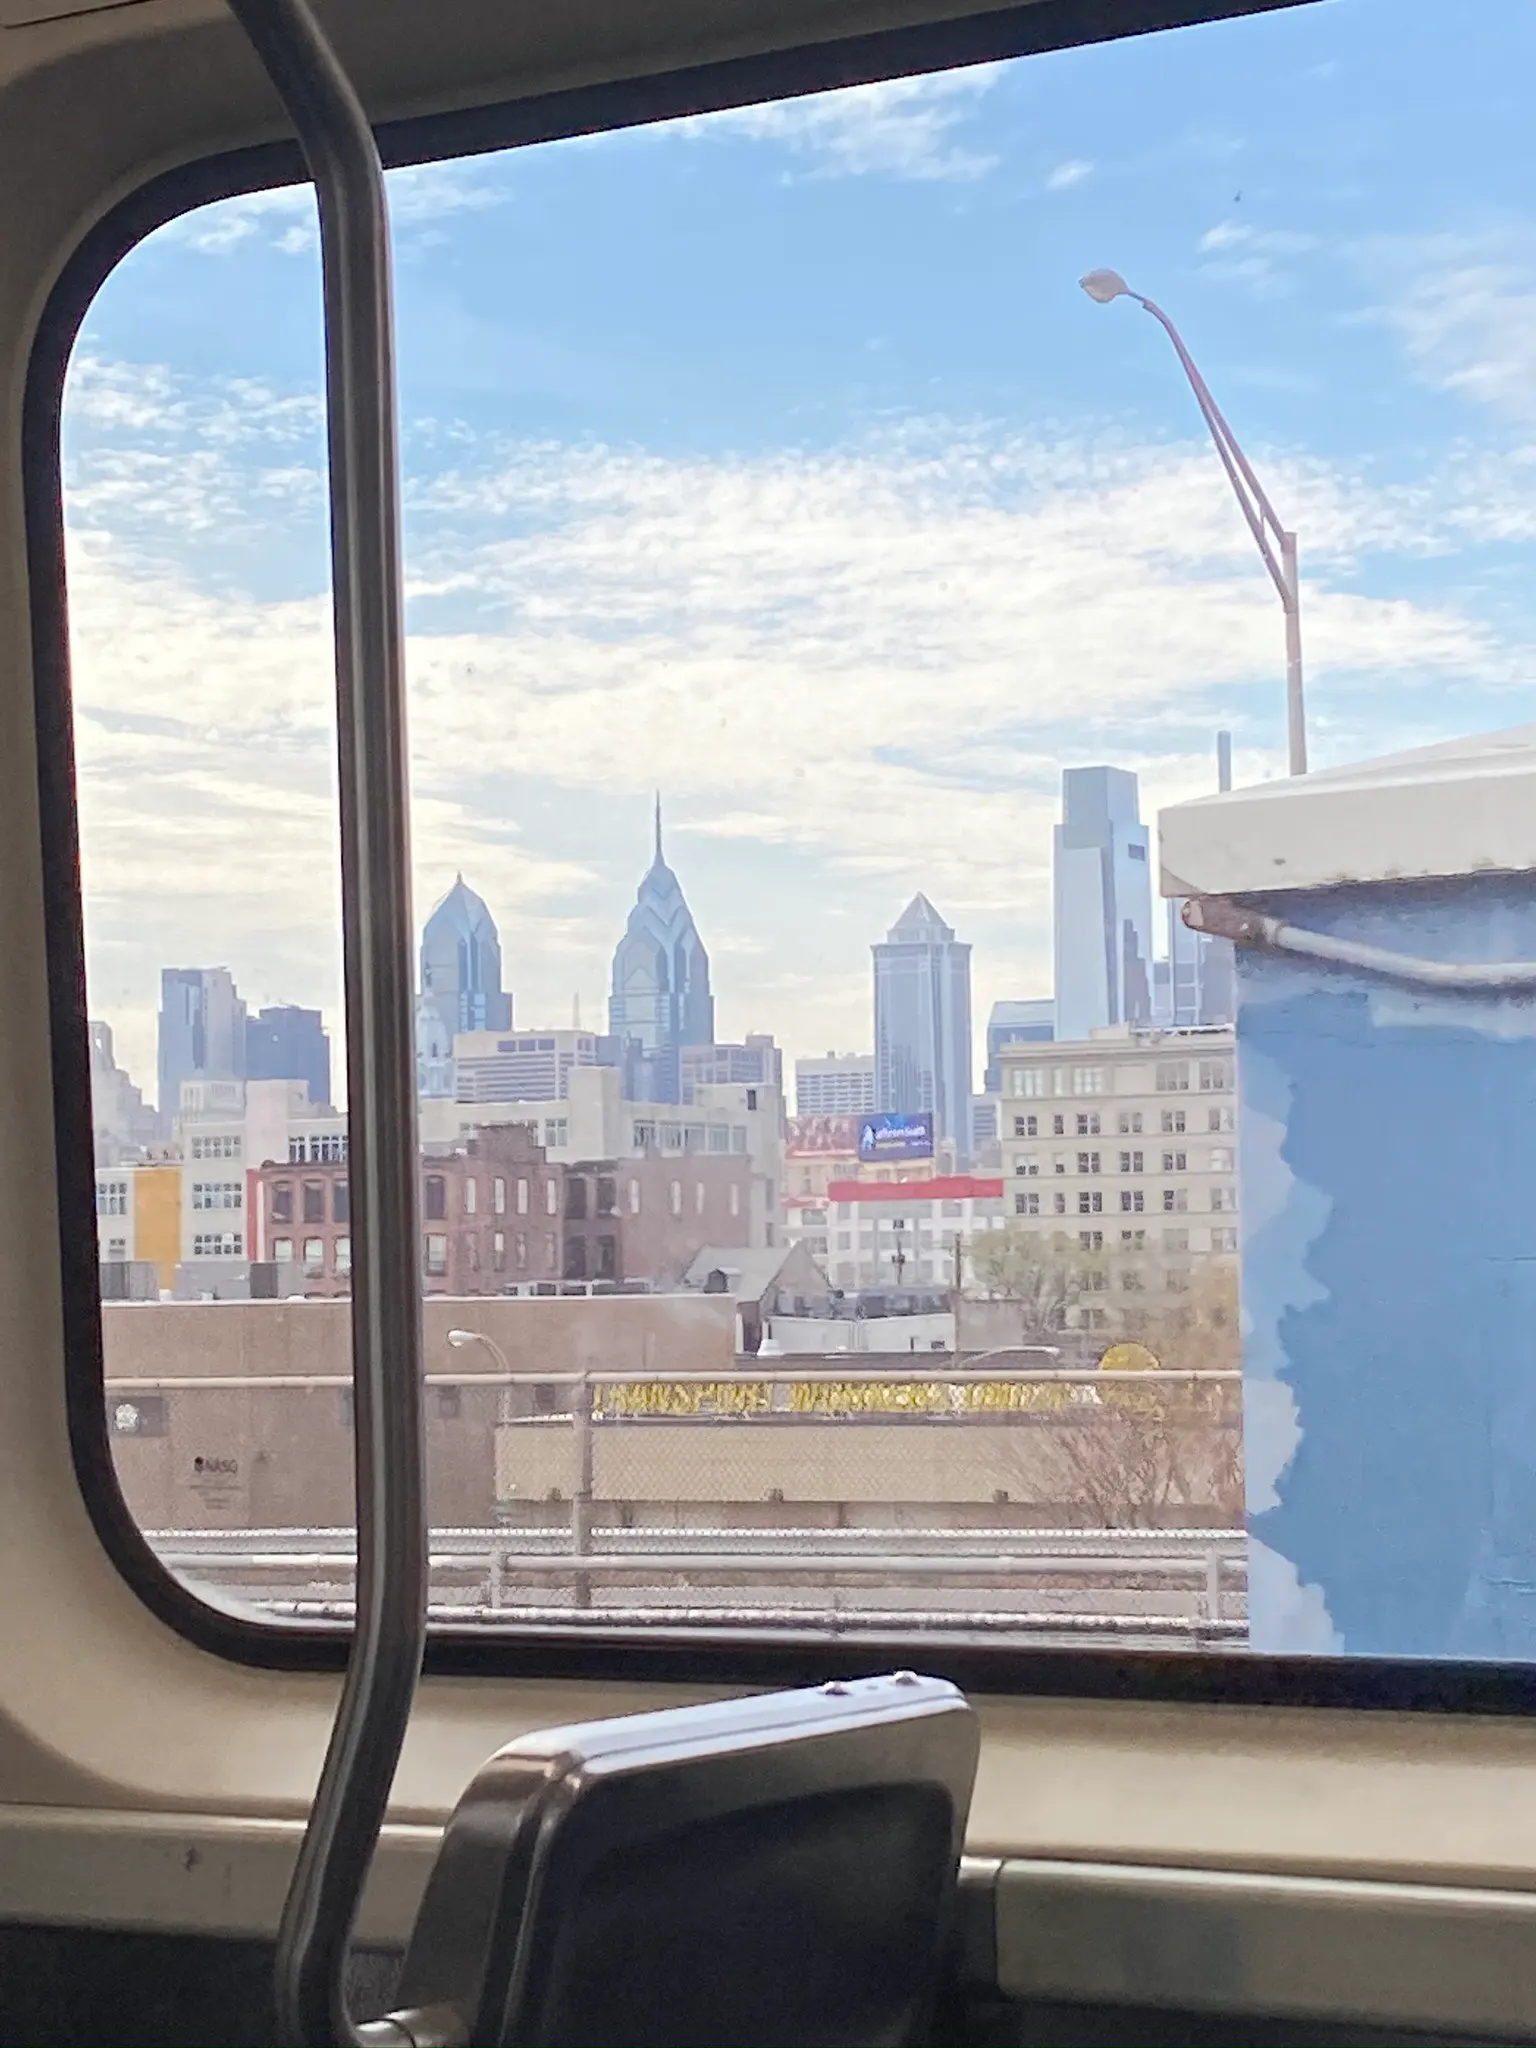 The train view of the Philly city skyline